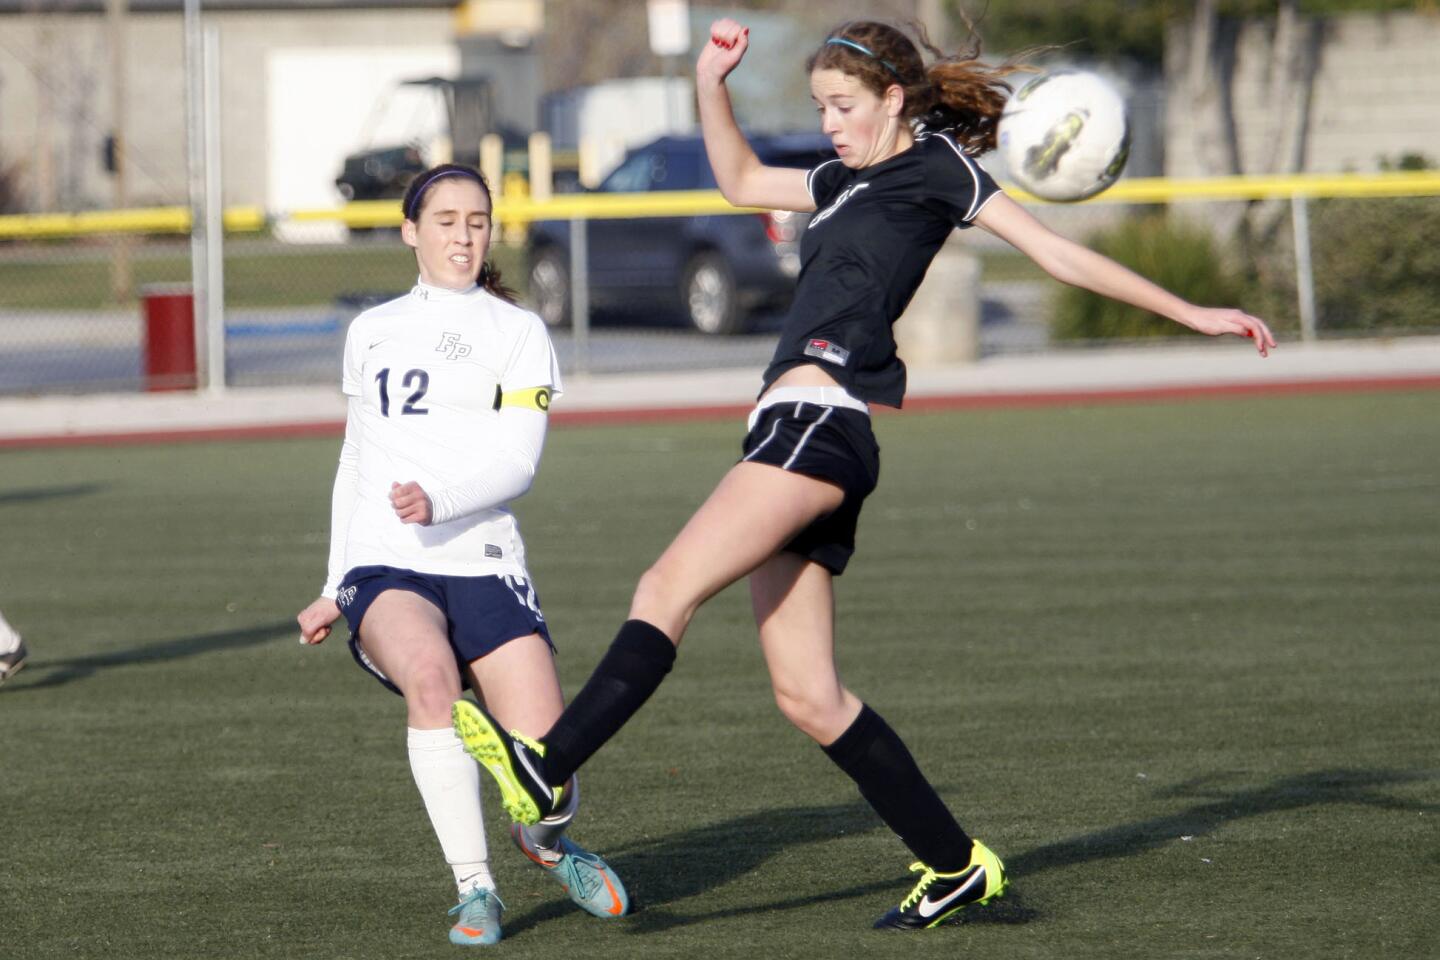 Flintridge Prep's Whitney Cohen, left, and Westridge's Julia Matthiessen fight for the ball during a game at the Glendale Sports Complex on Tuesday, January 29, 2013.